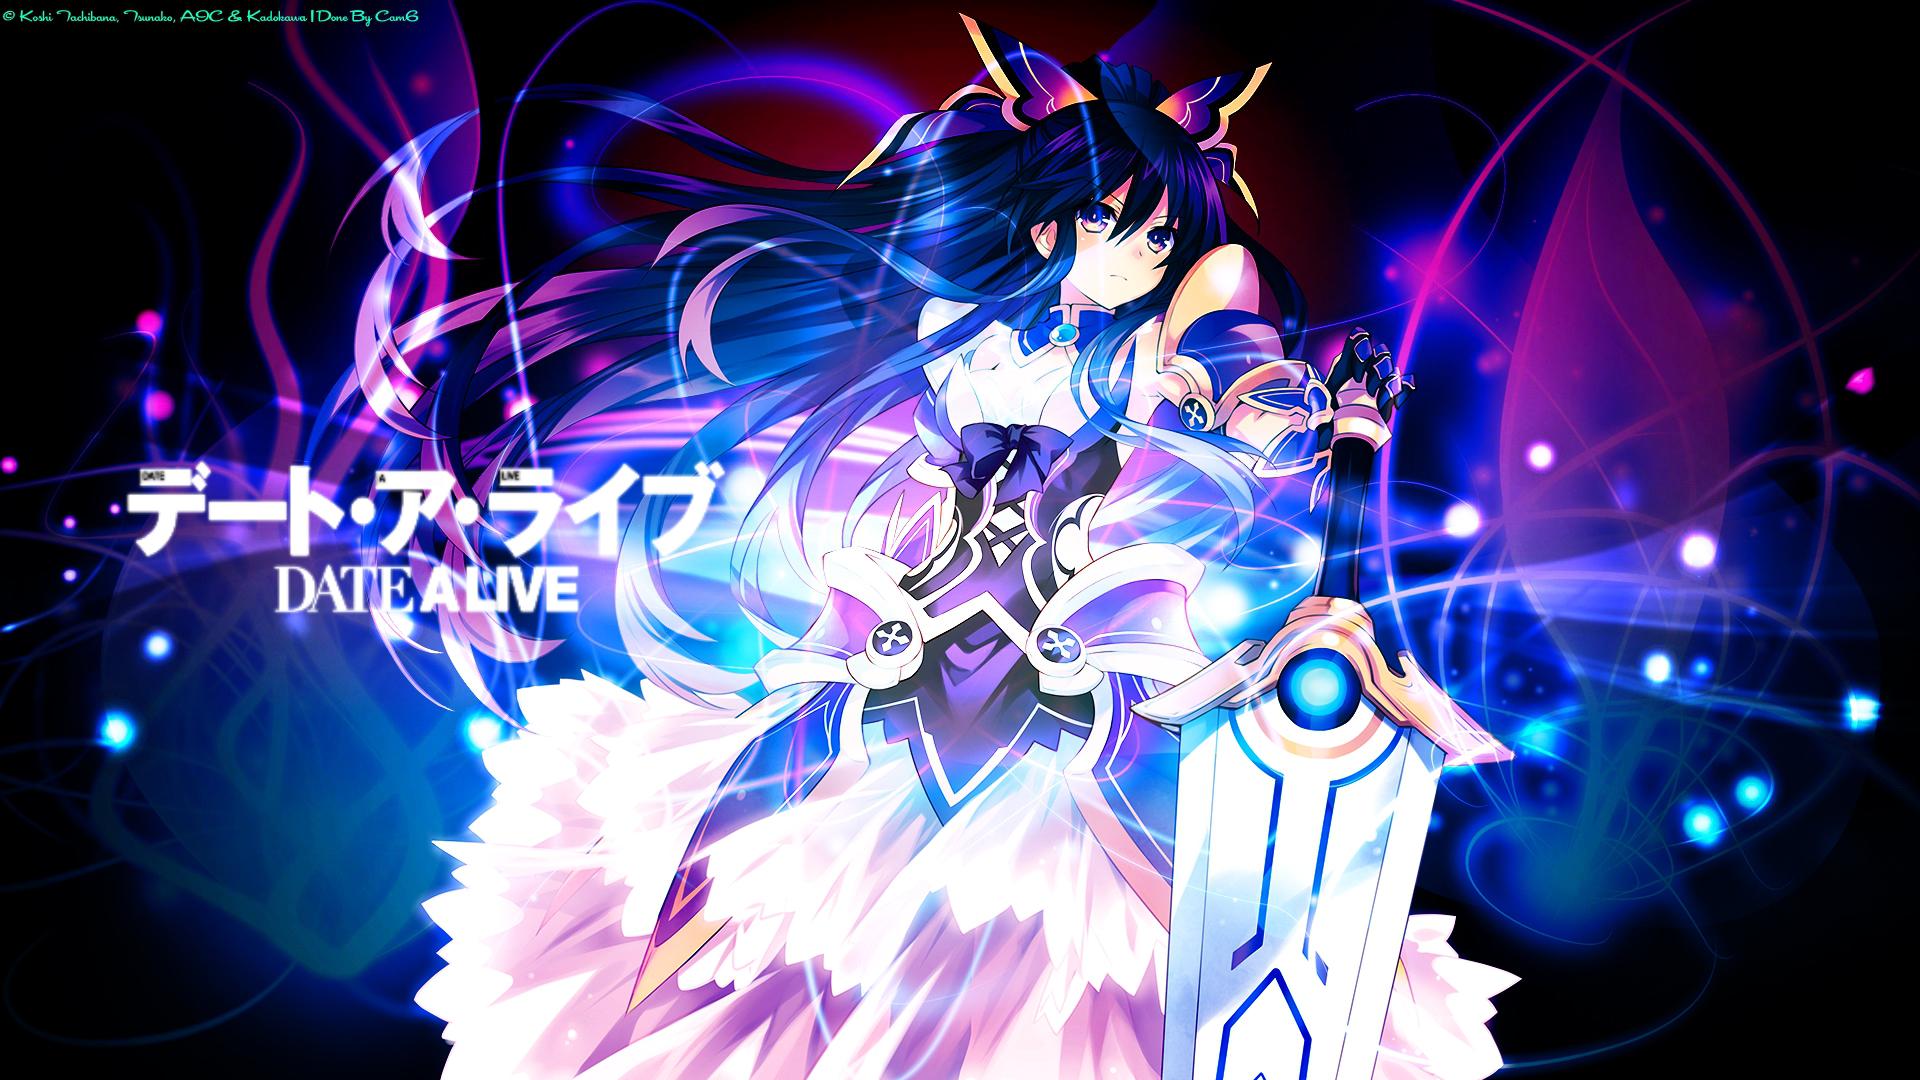 Anime Date A Live Hd Shido And Tohka Wallpapers Wallpaper Cave